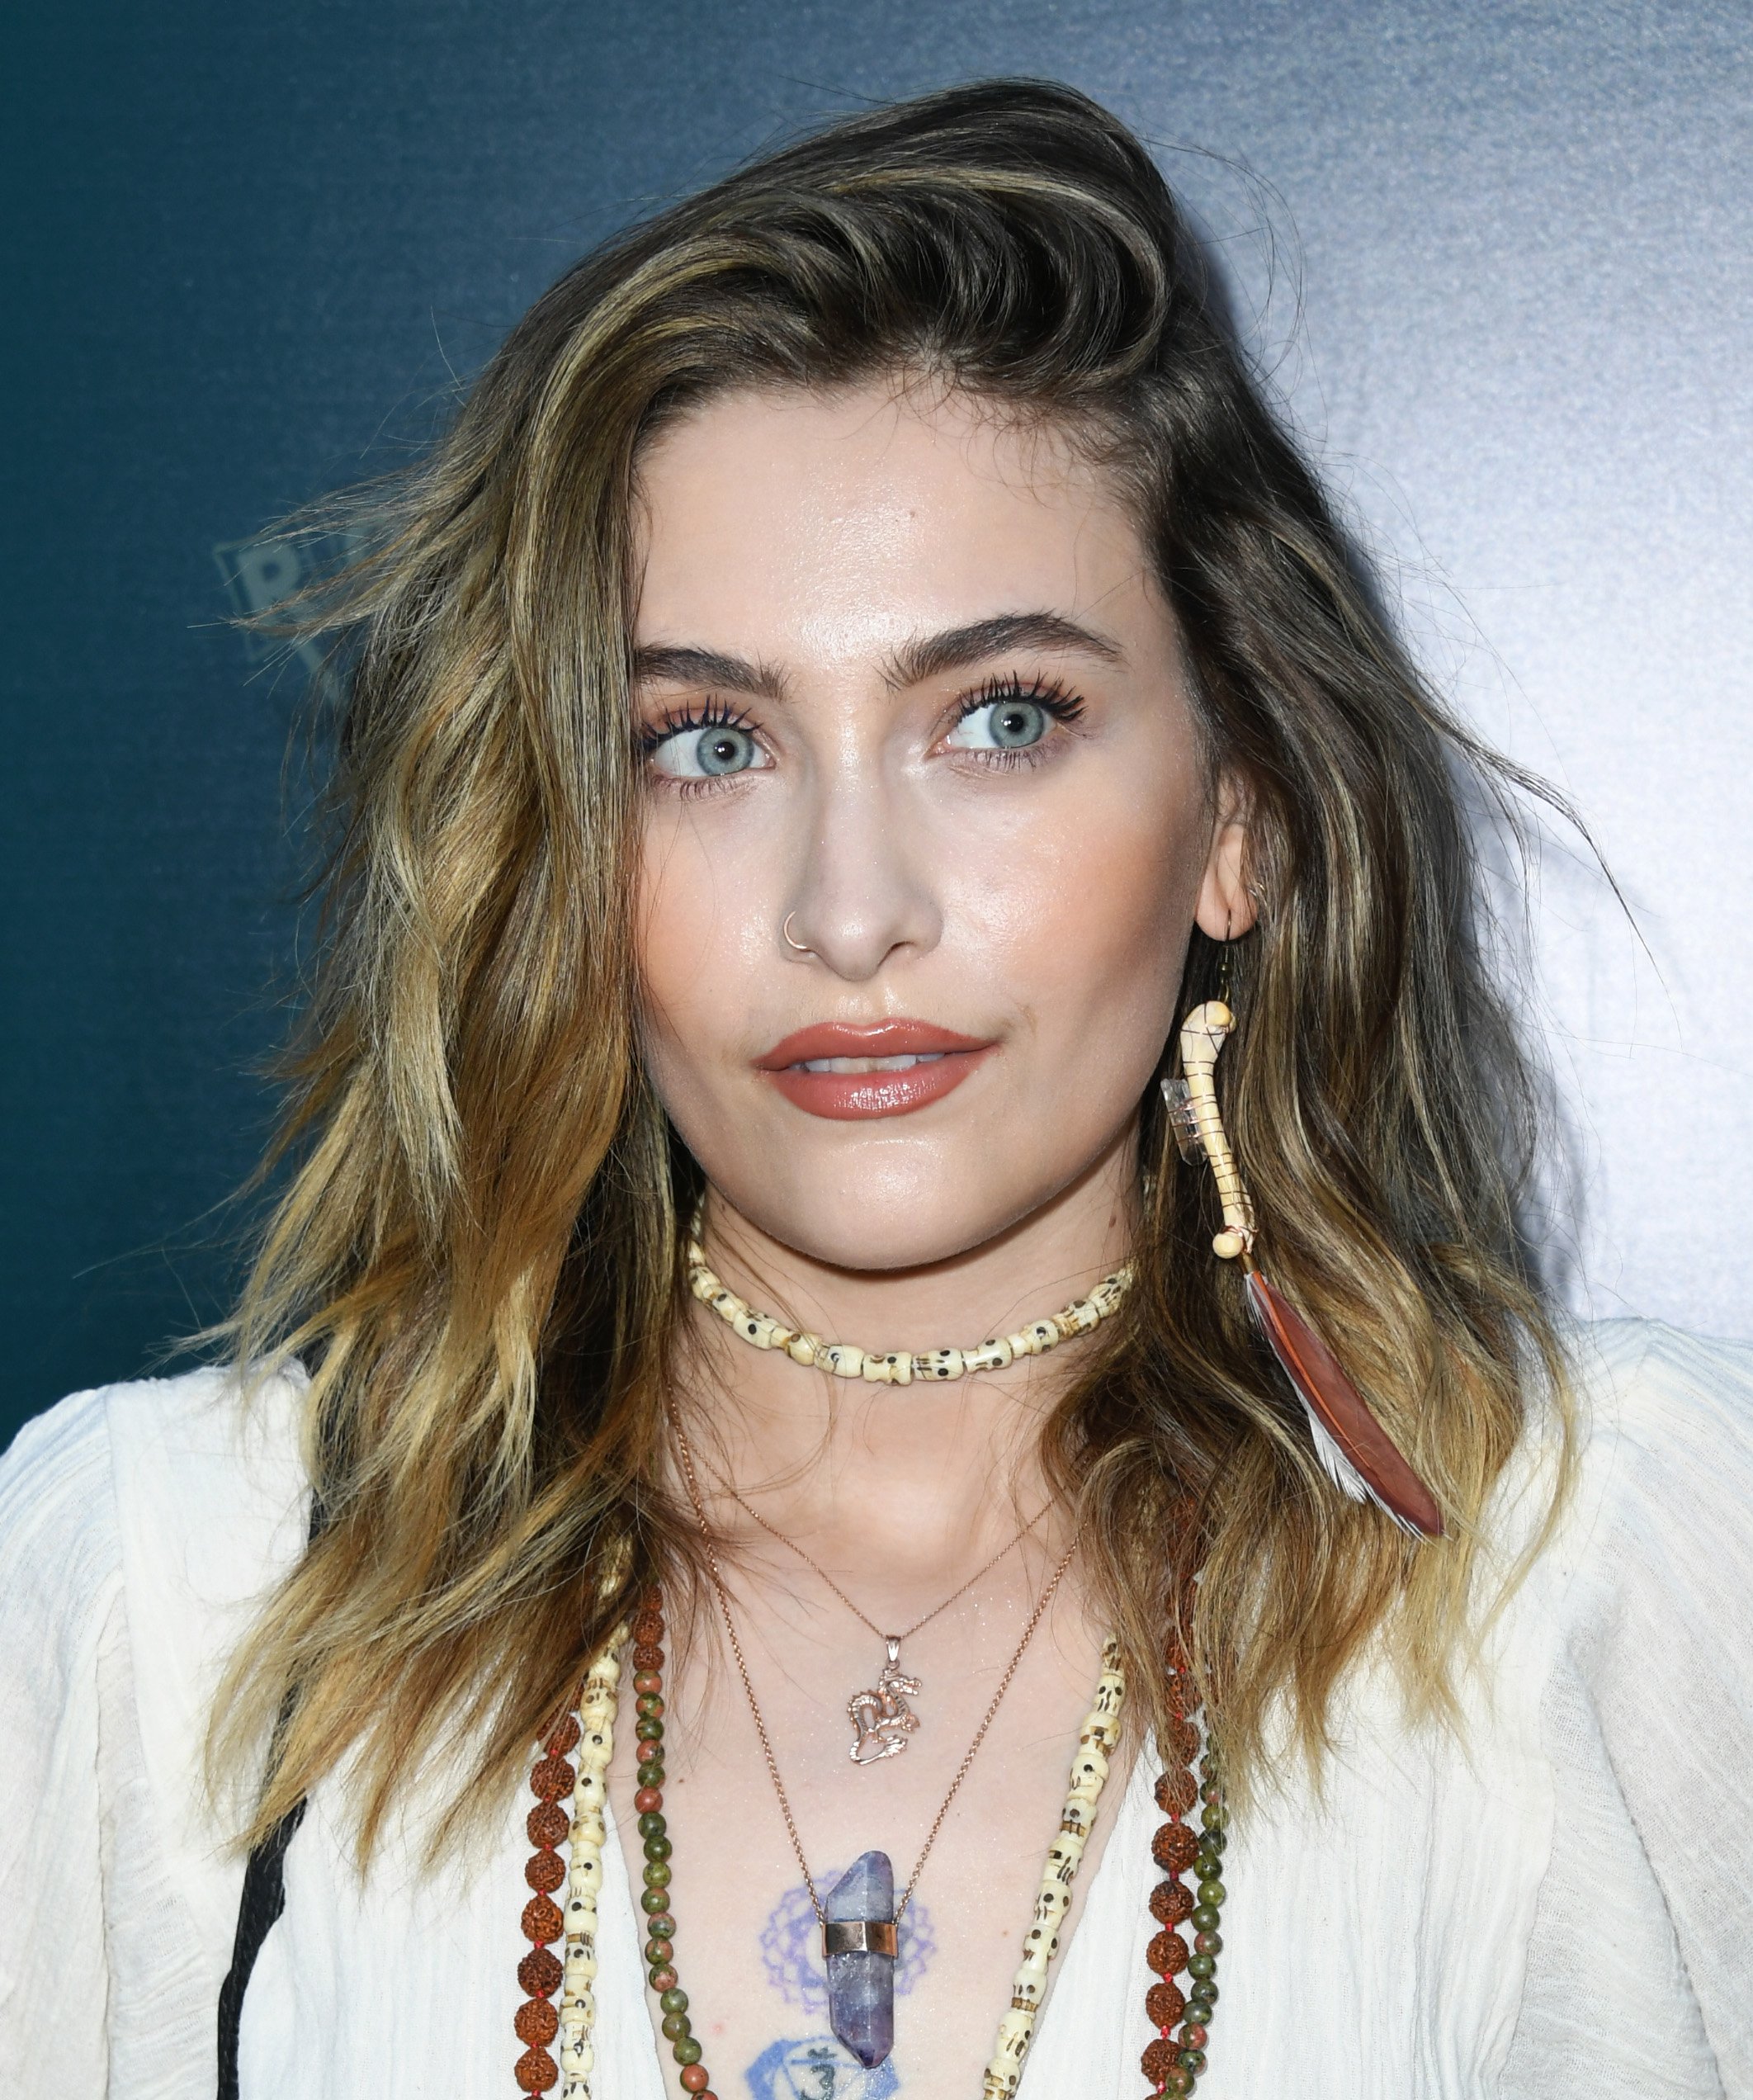 Paris Jackson attends a screening of "The Peanut Butter Falcon" in Hollywood, California on August 1, 2019 | Photo: Getty Images